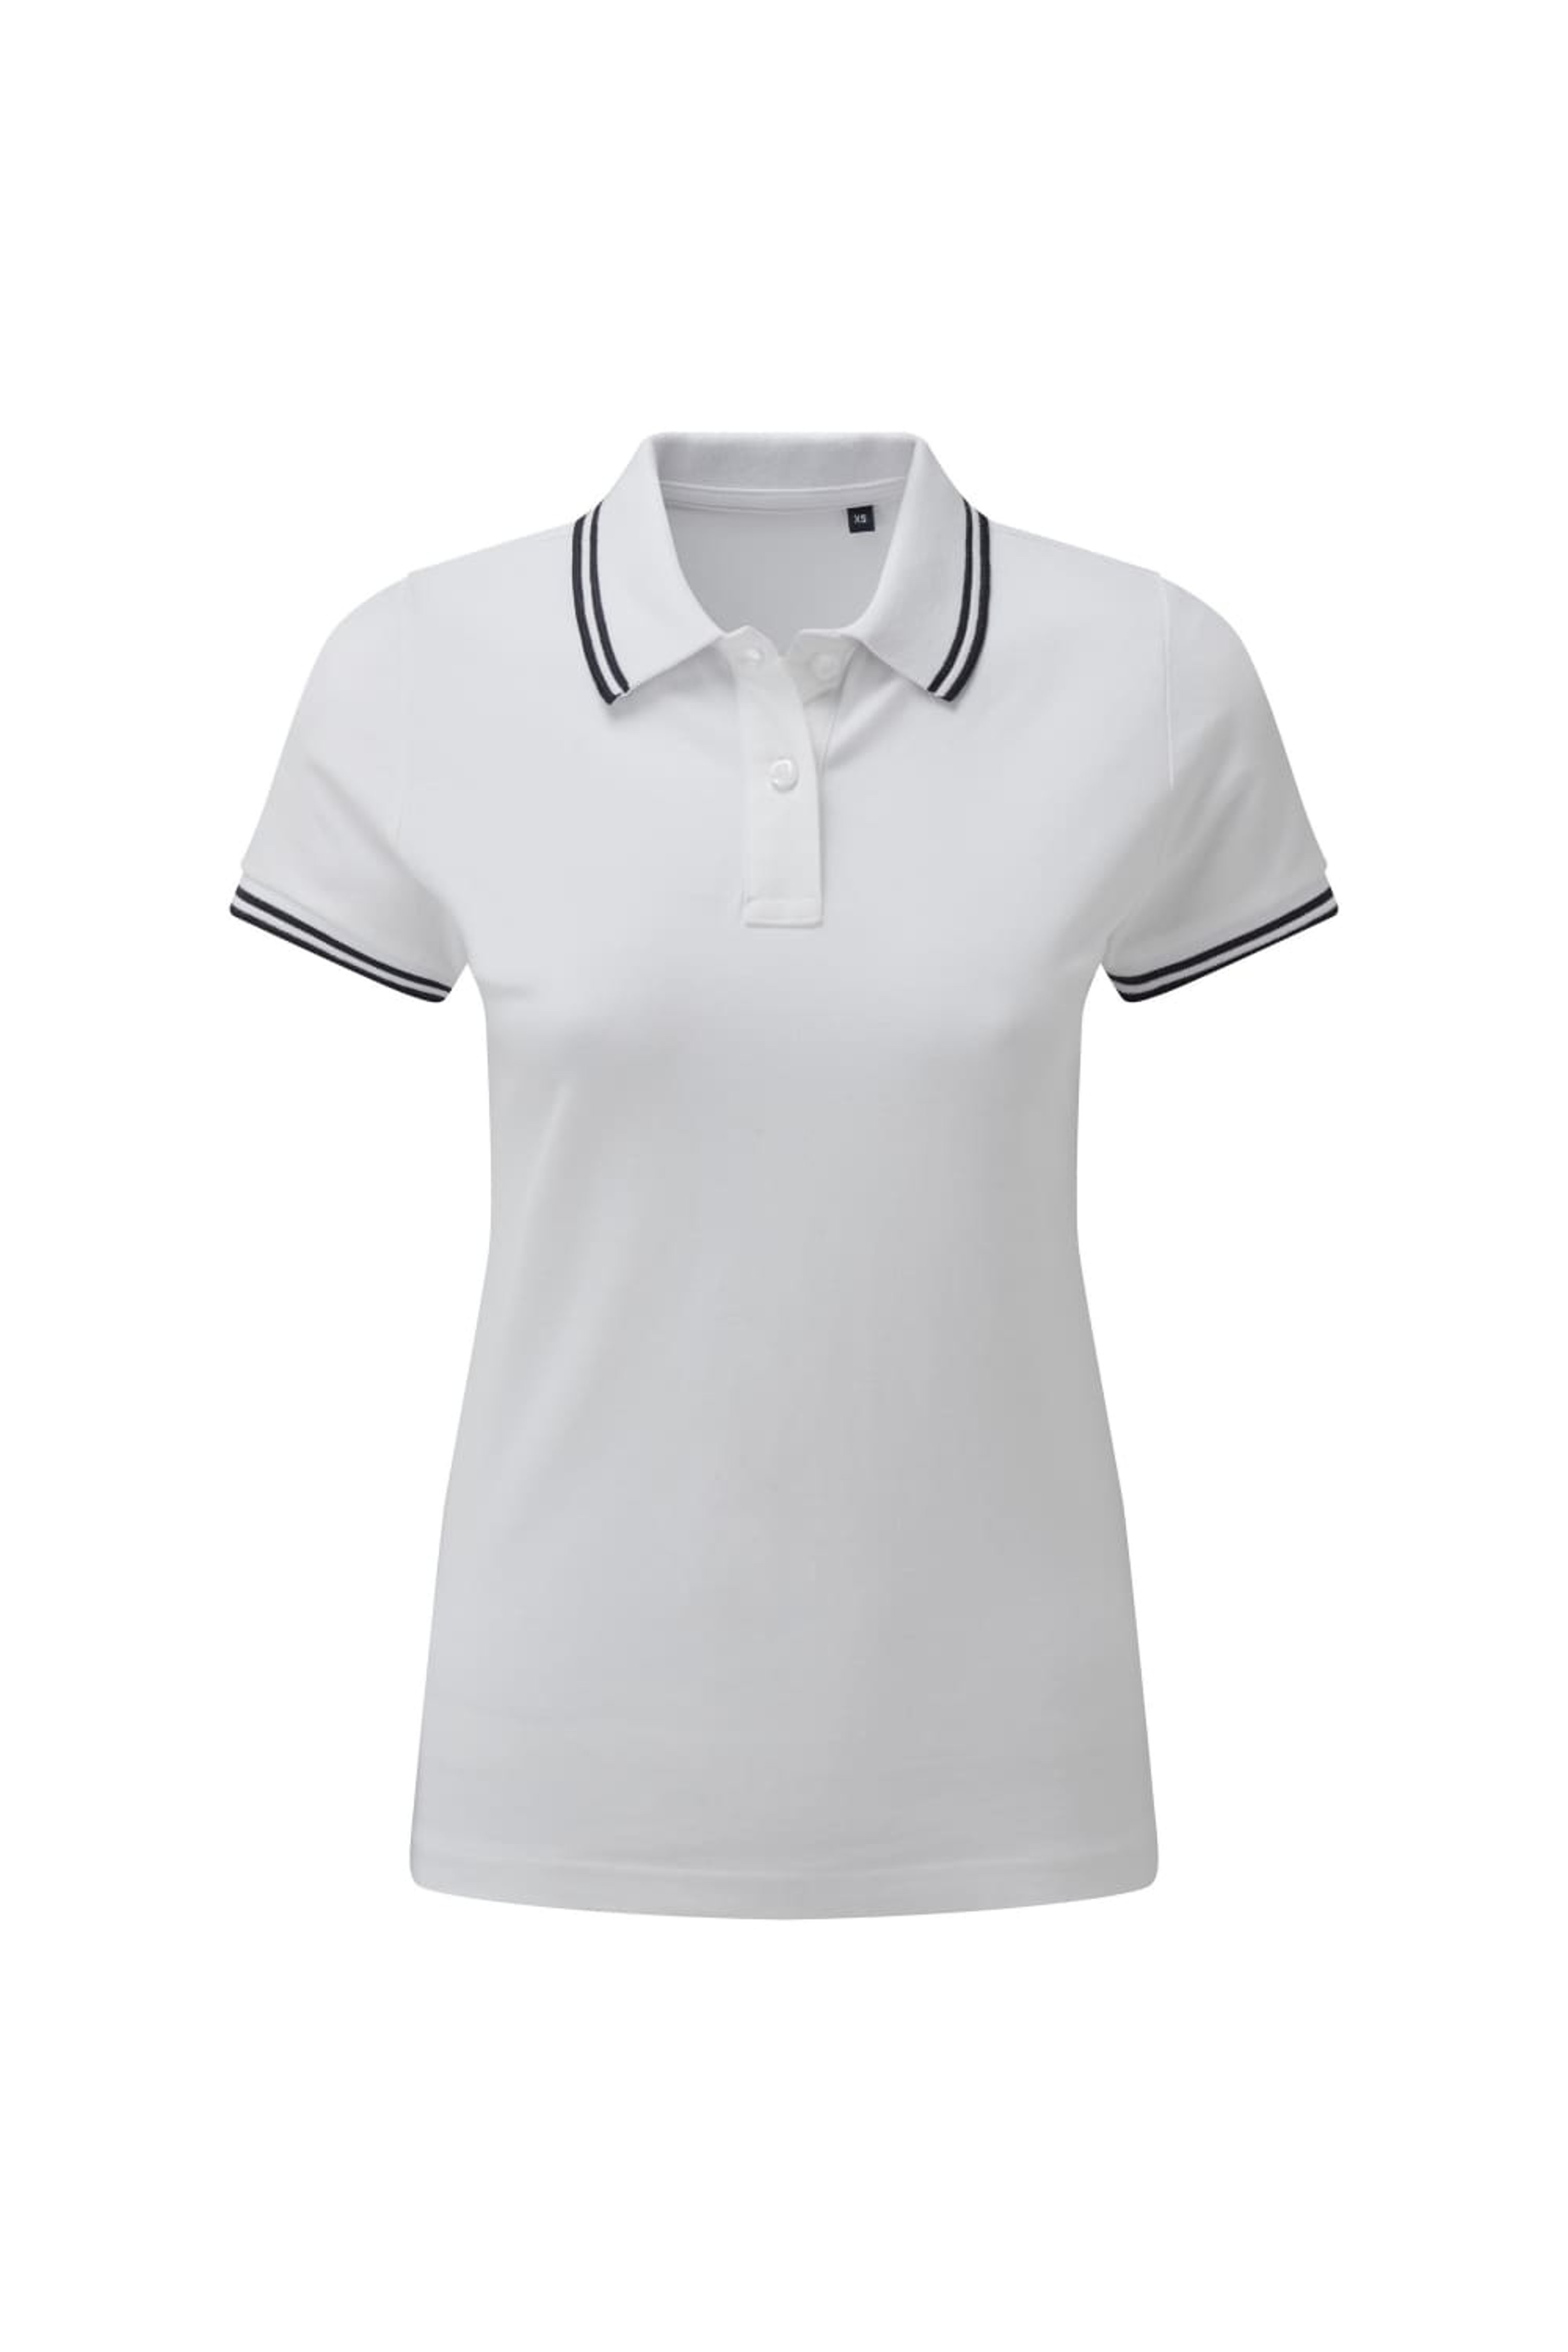 ASQUITH & FOX ASQUITH & FOX ASQUITH & FOX WOMENS/LADIES CLASSIC FIT TIPPED POLO (WHITE/NAVY)